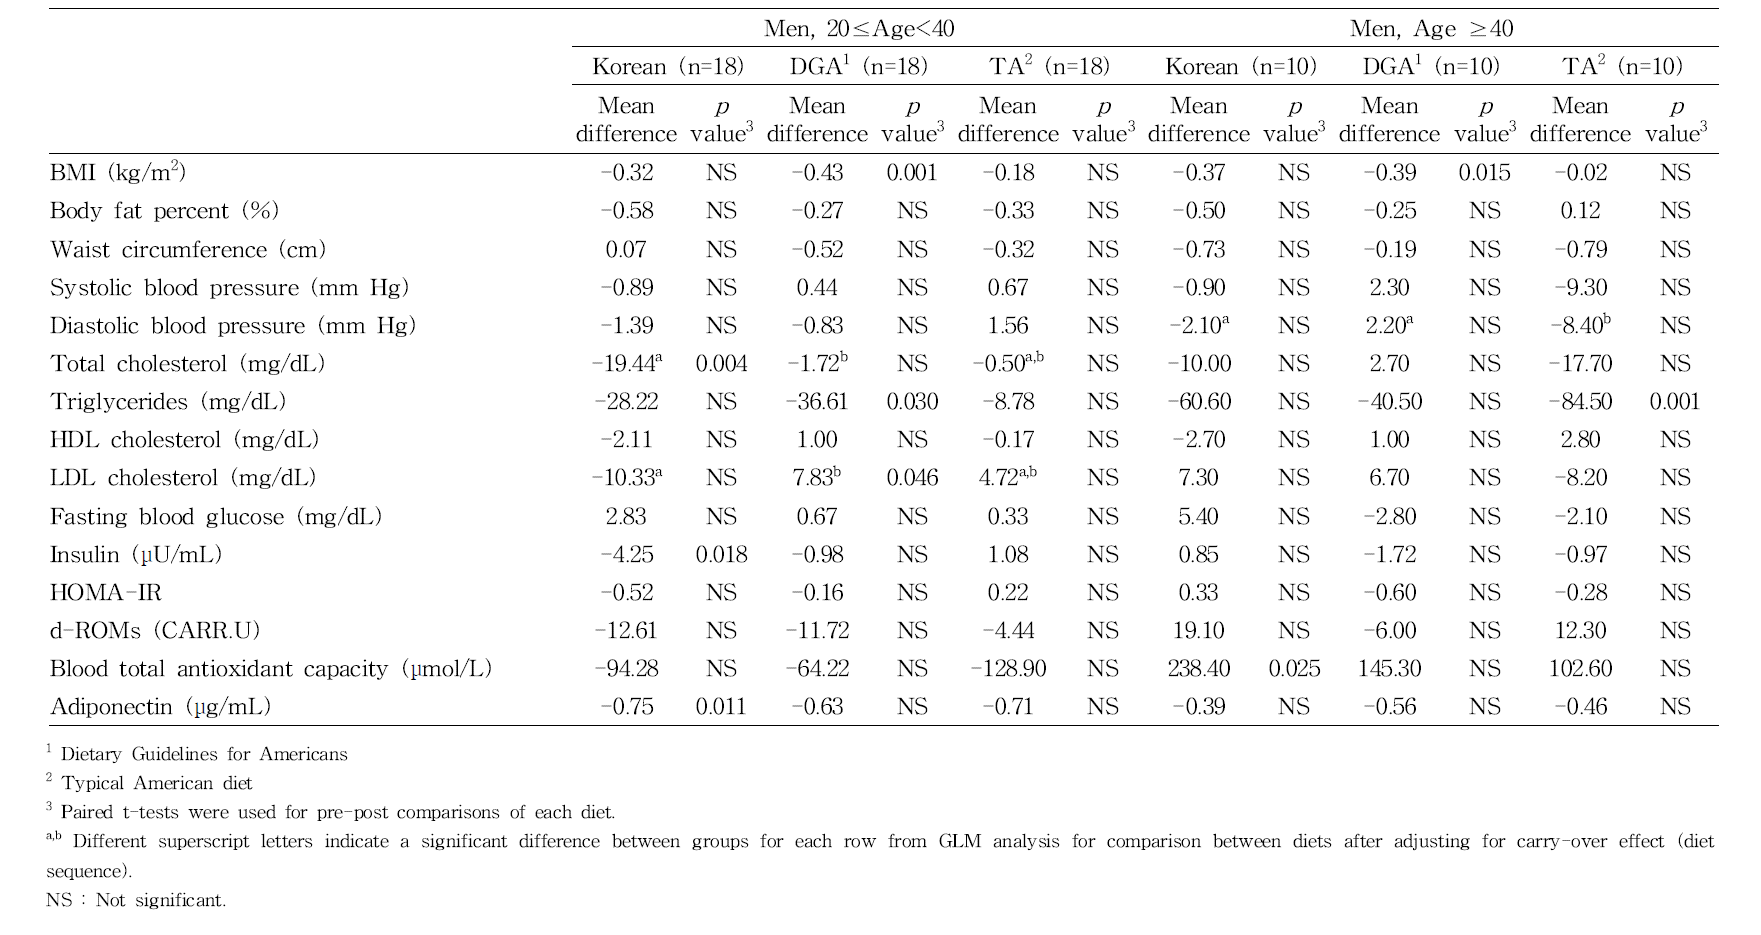 Changes in anthropometric and biochemical parameters by sex and age group according to experimental diet